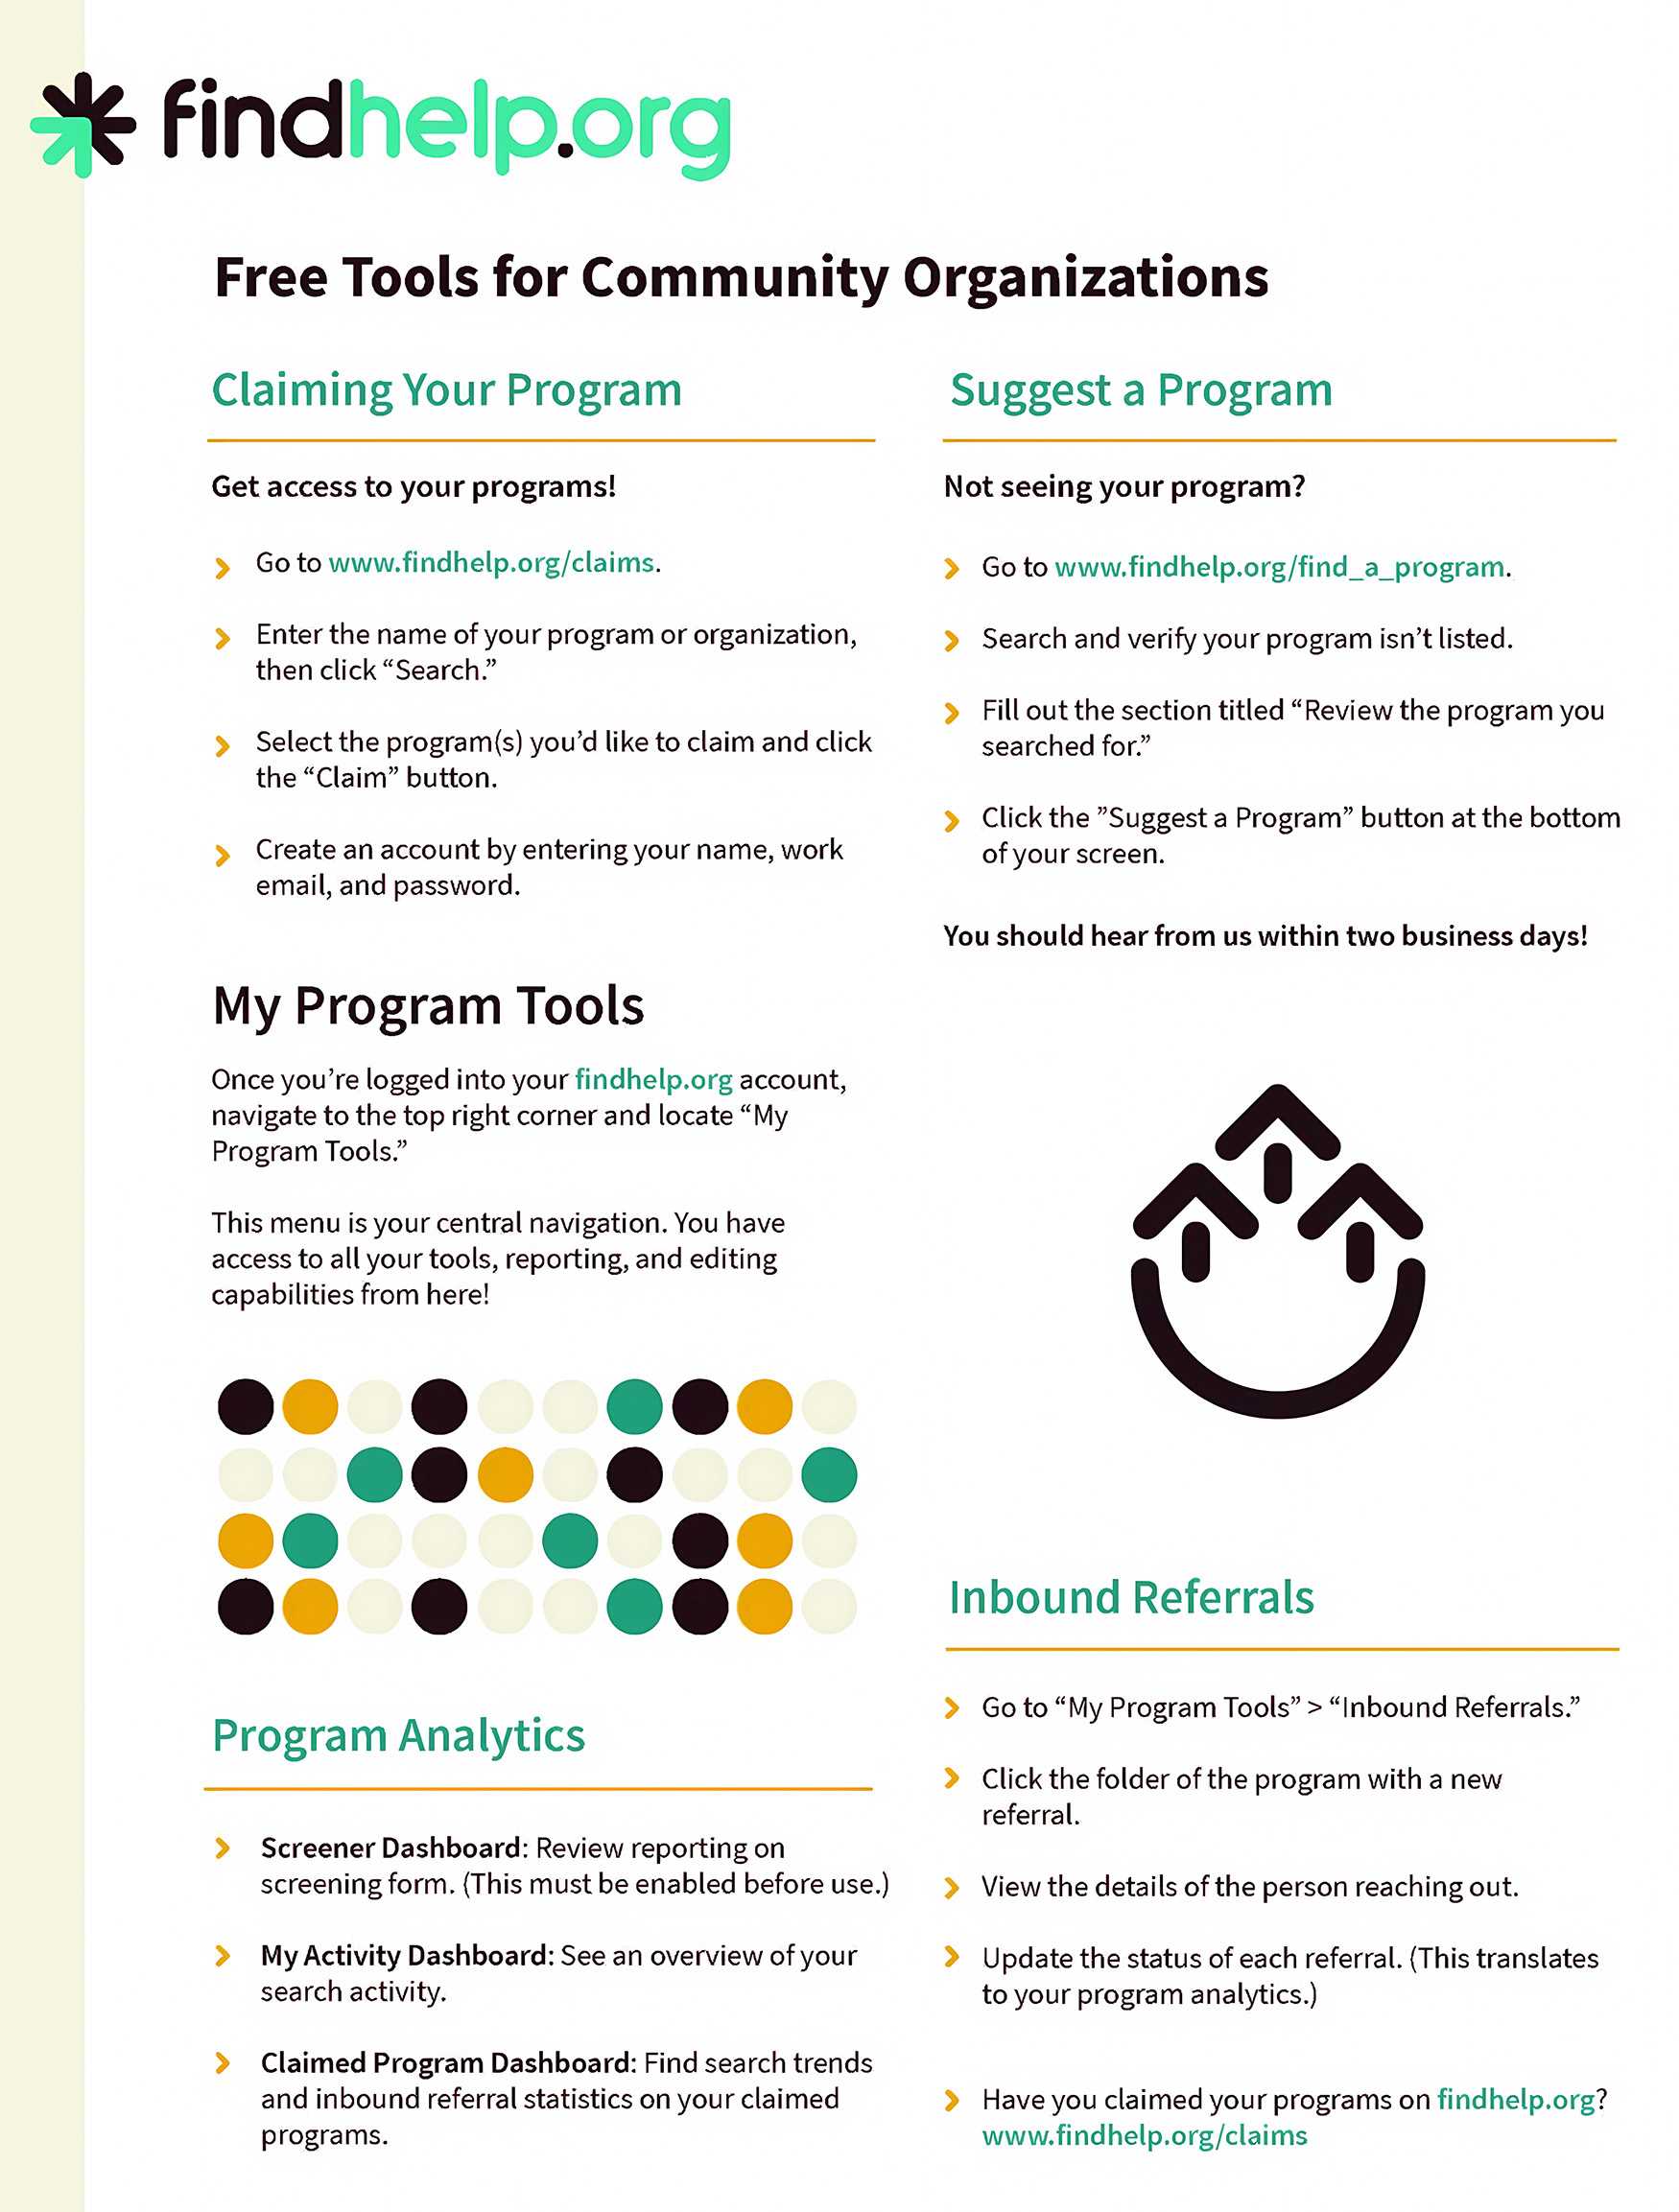 FindHelp.org Free Tools for Community Organizers